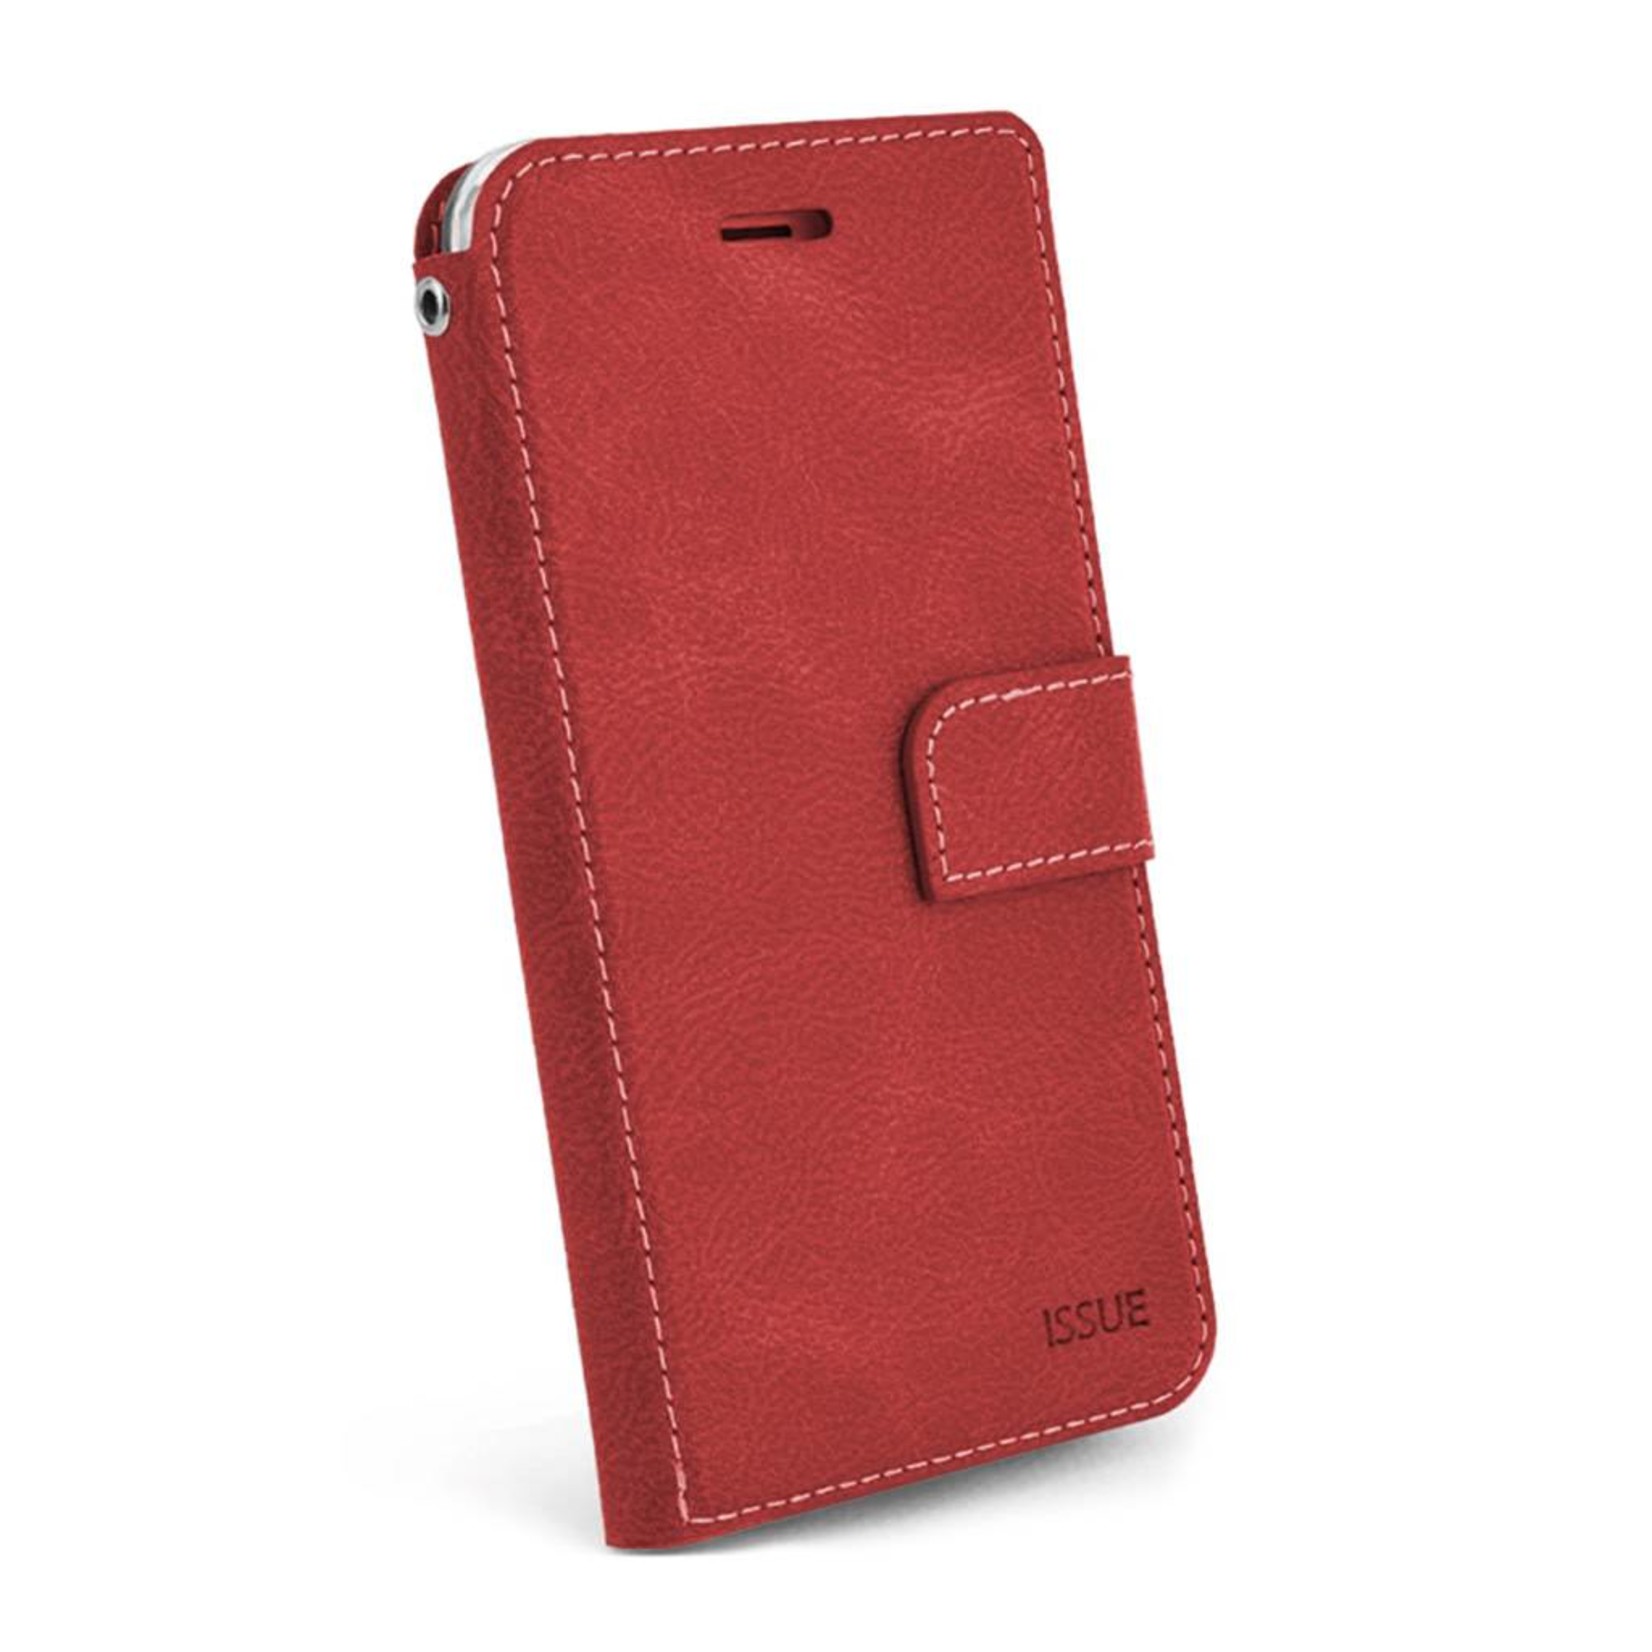 Molan Cano Issue Diary PU Leather Wallet Case for iPhone XR